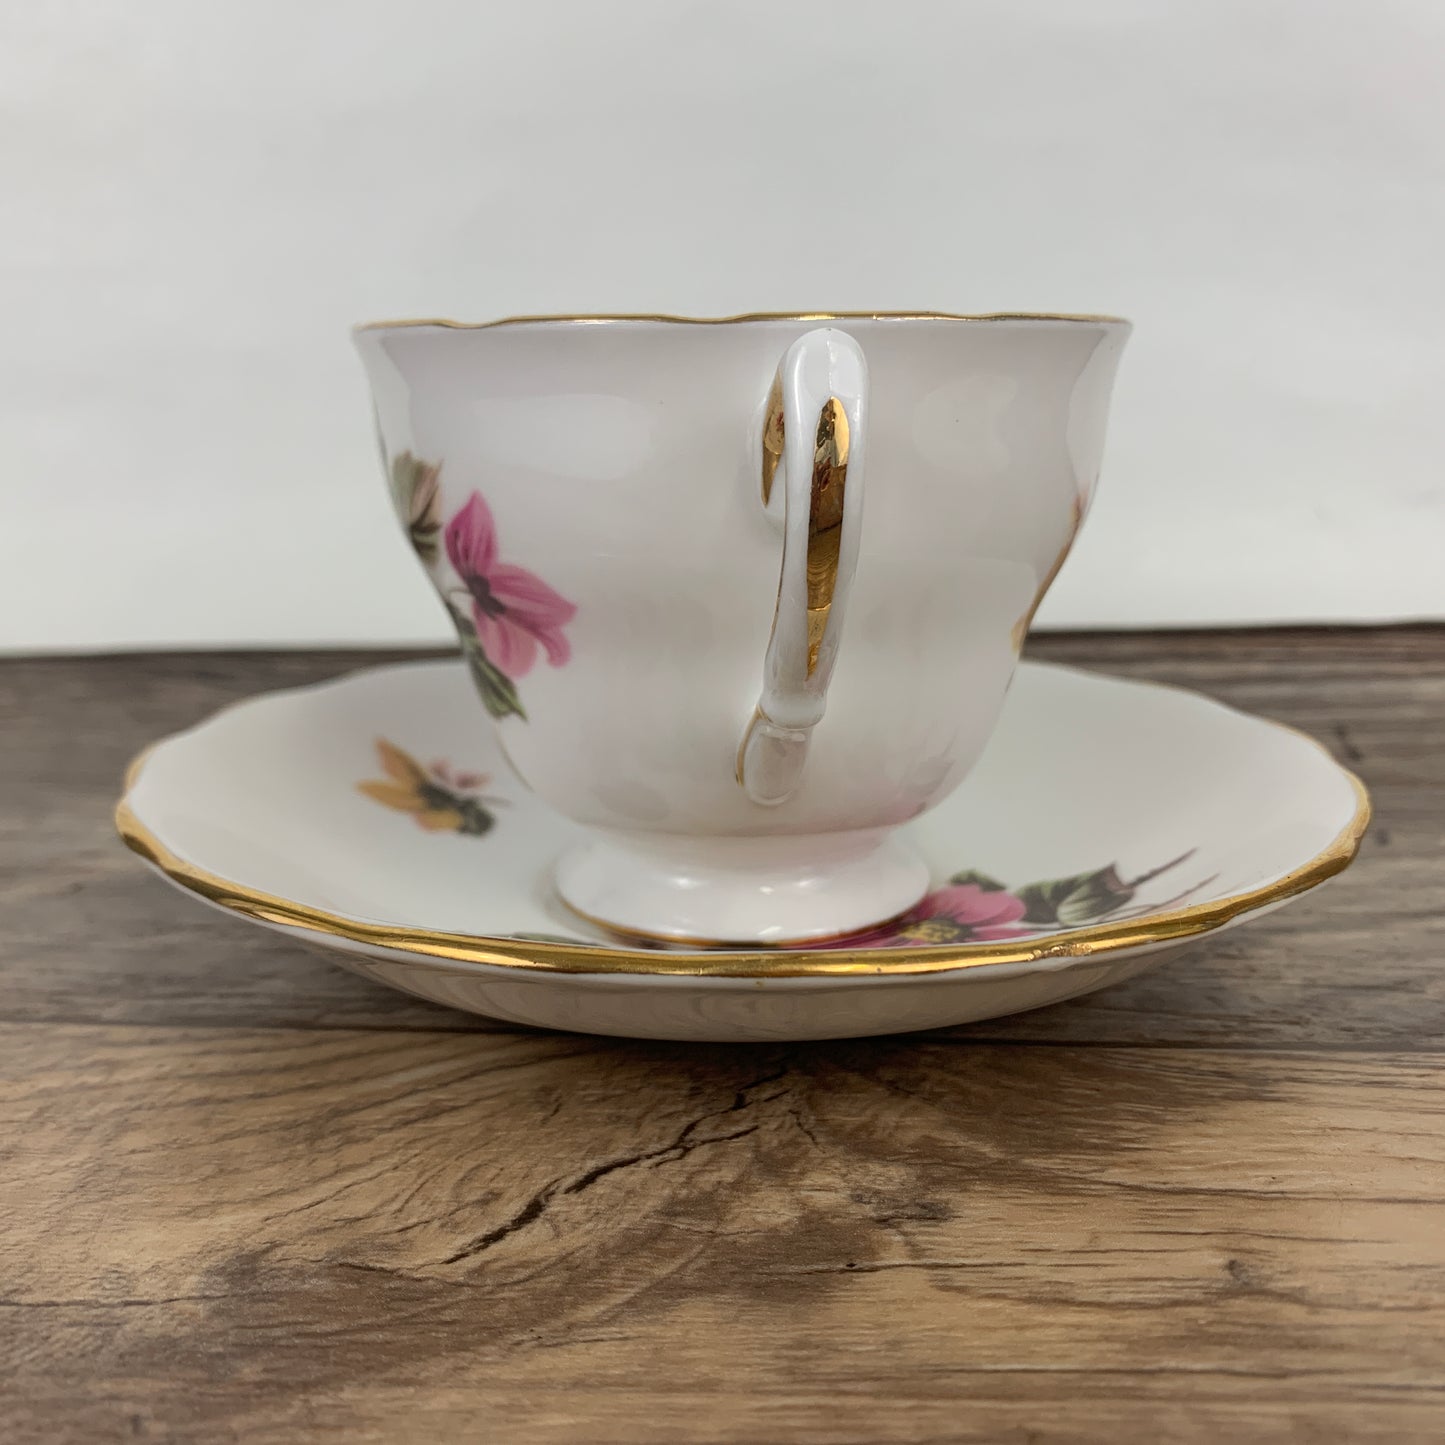 Royal Vale Vintage Teacup and Saucer Set with Pink and Yellow Floral Pattern